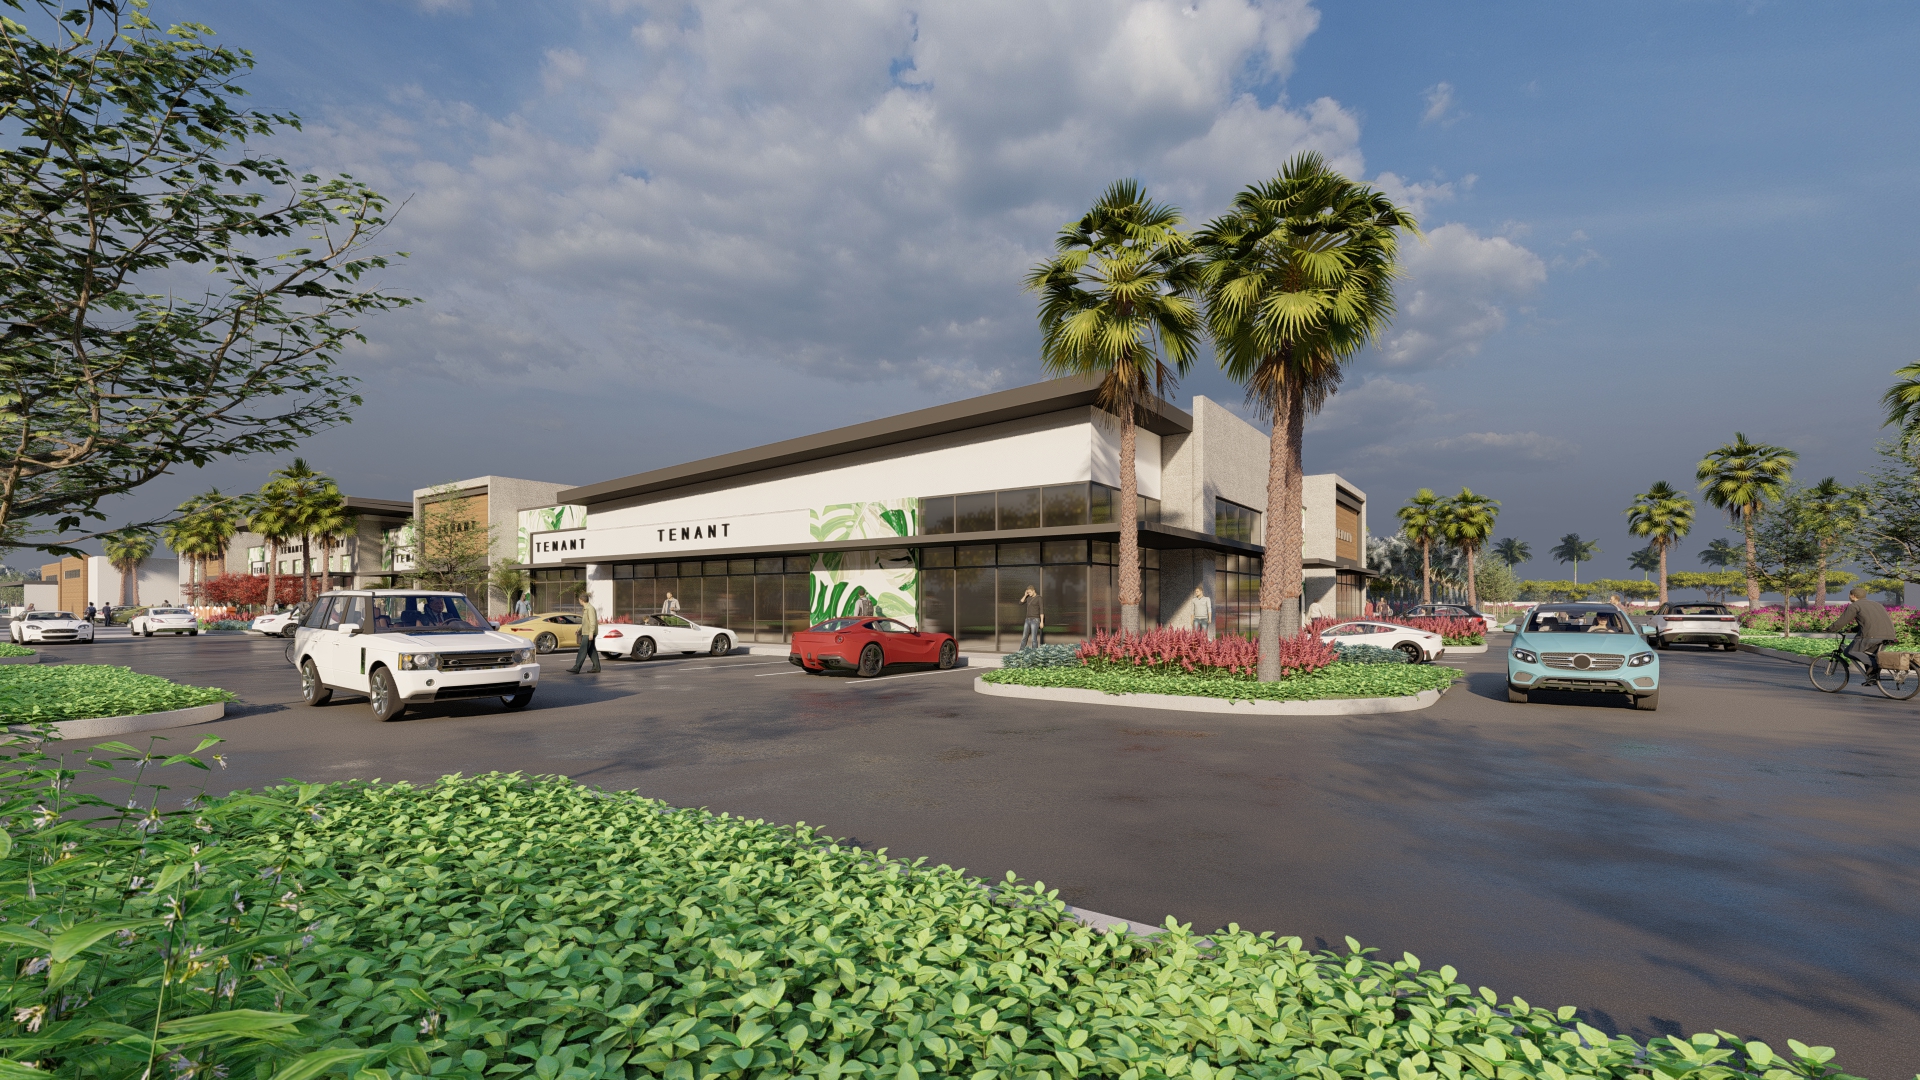 PEBB Enterprises and Banyan Development Secure Aldi as Anchor Tenant for Commercial Project in Port St. Lucie’s Tradition